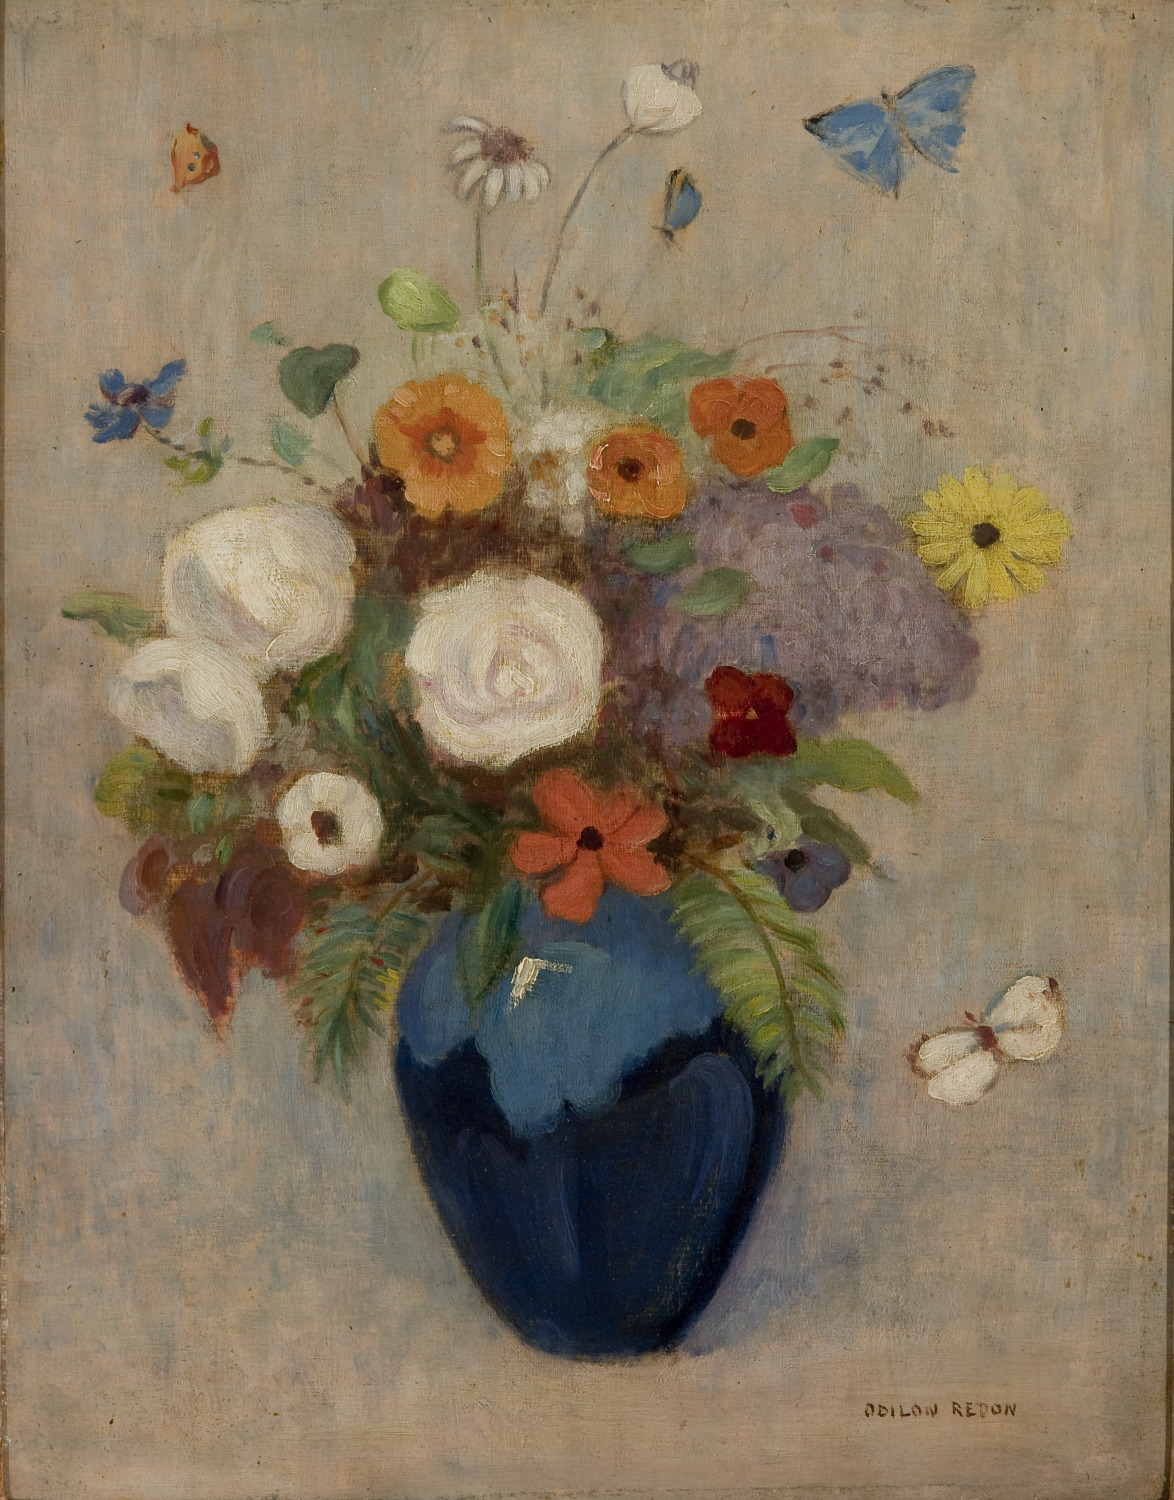 Odilon Redon, Flowers in a Vase (Flores en un florero), not dated. Oil on board. Gift of Mr. and Mrs. Donald D. Harrington.